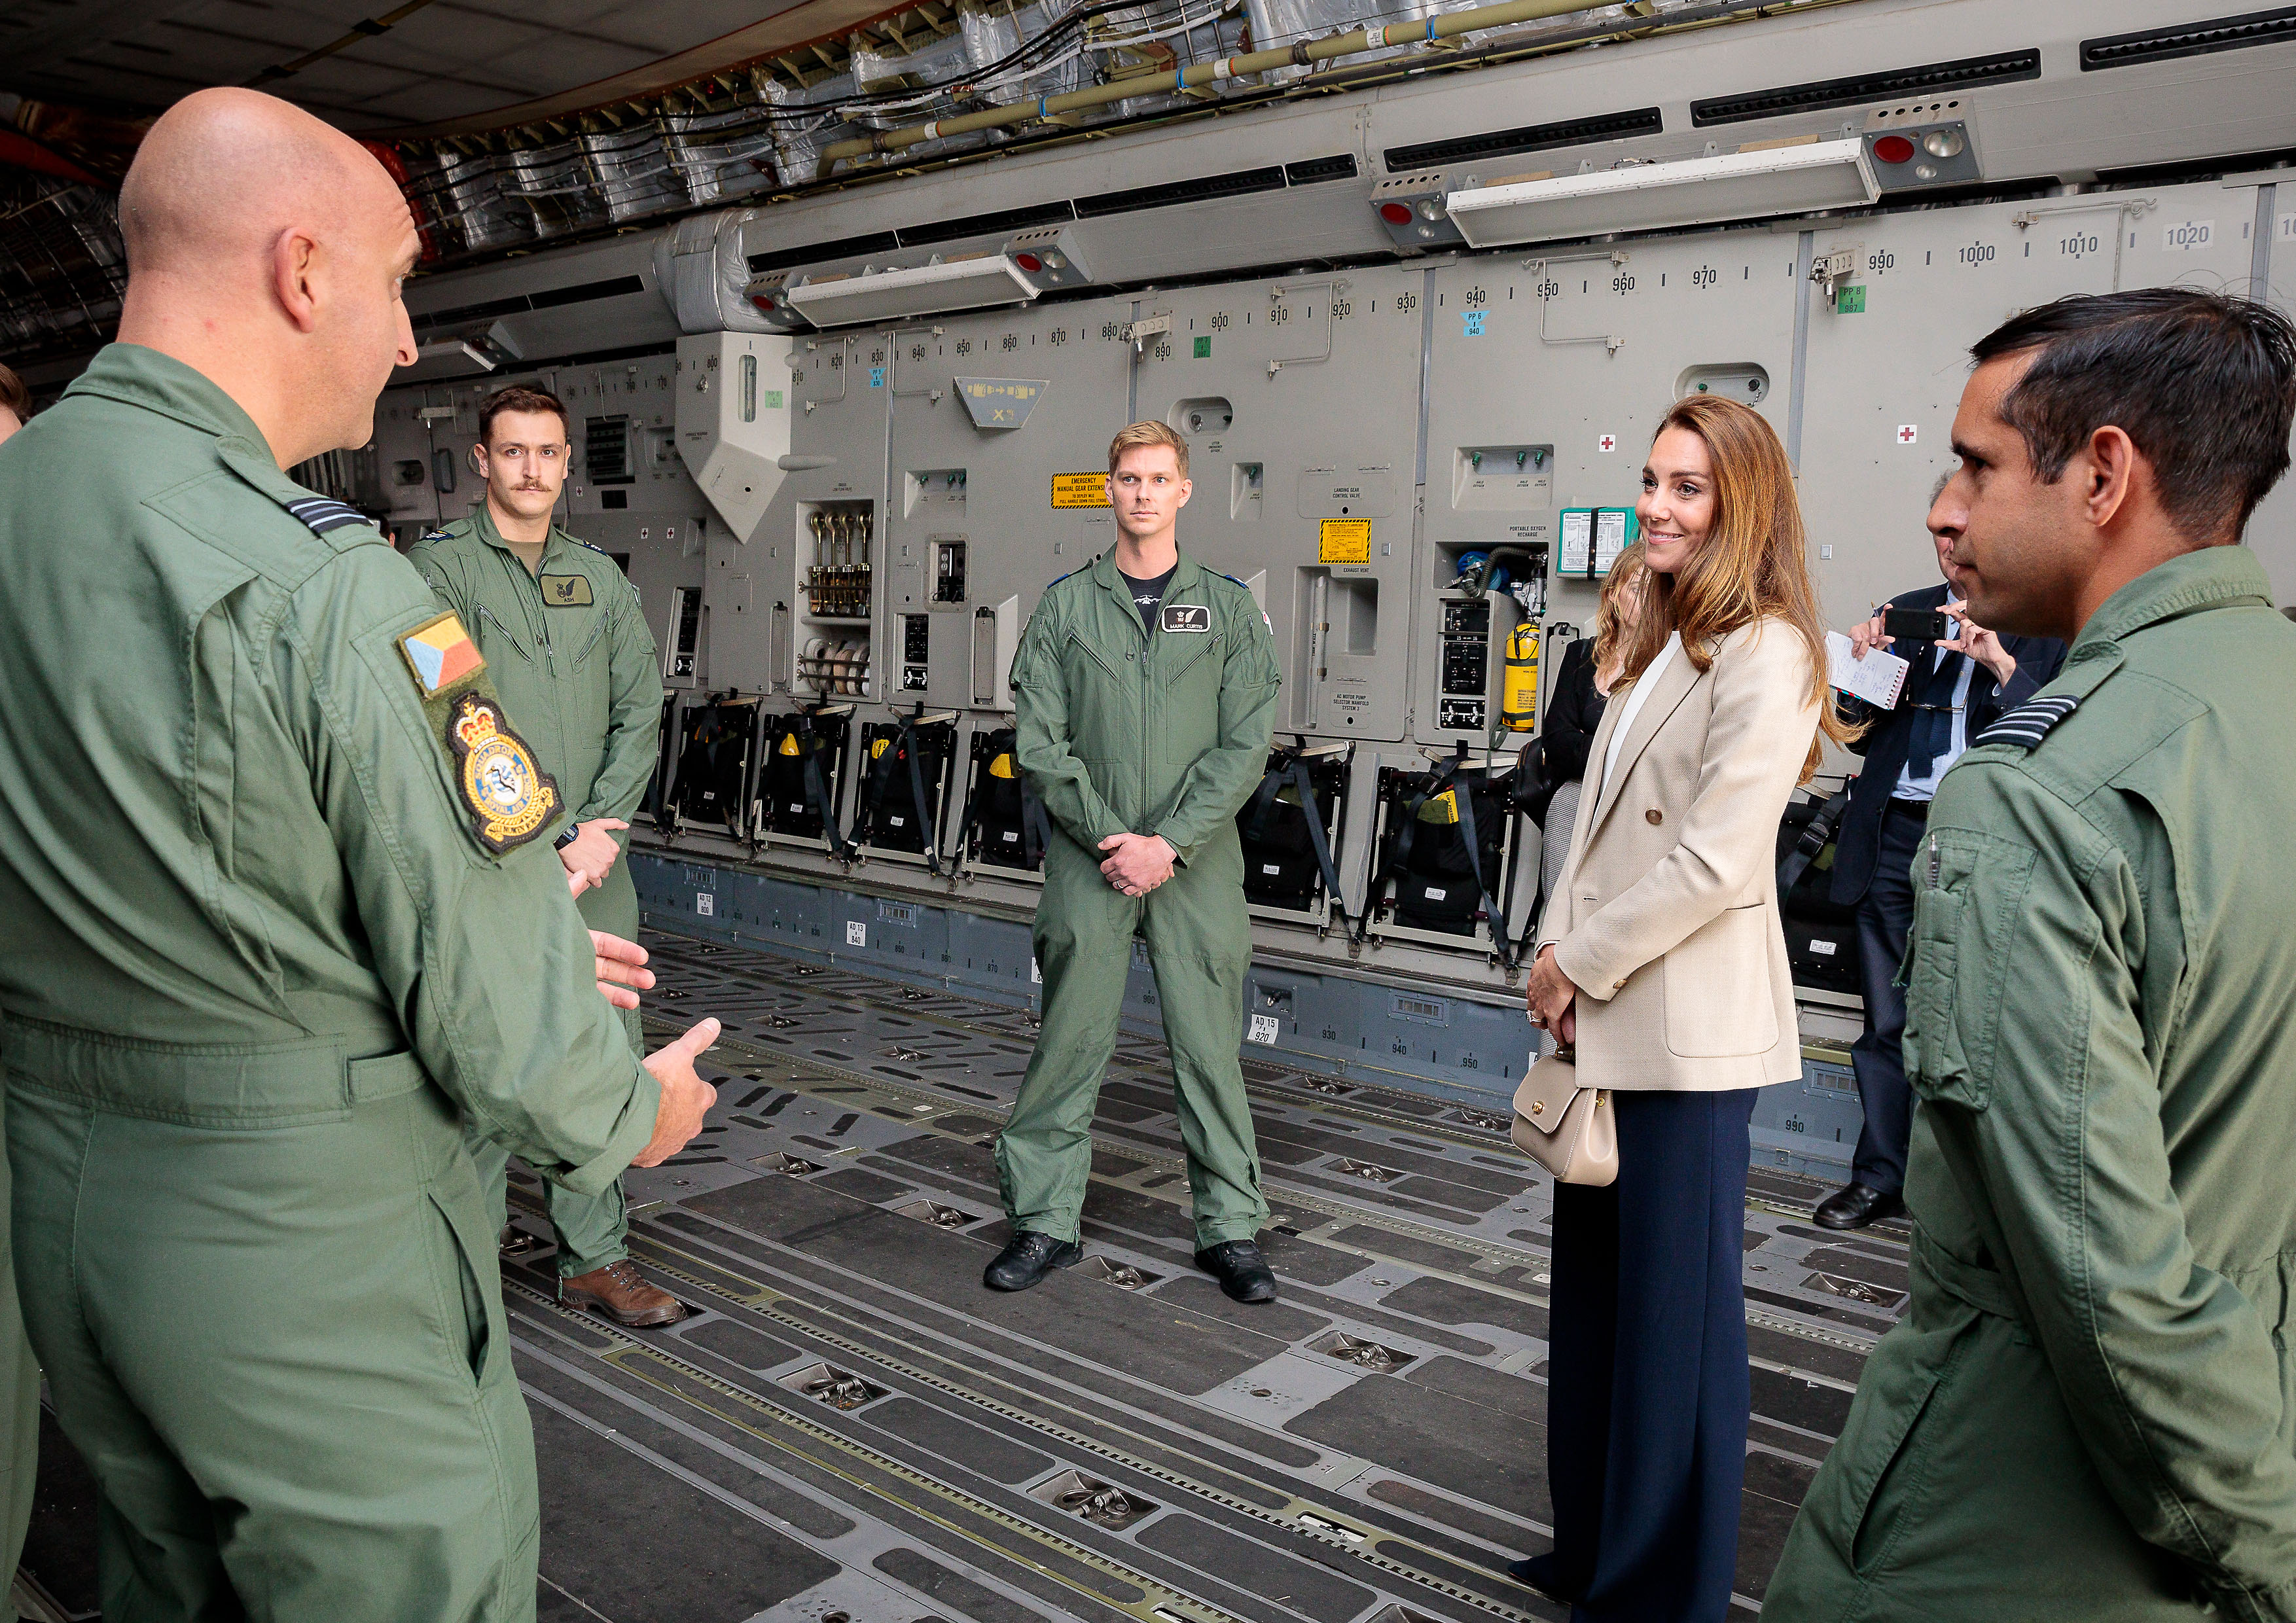 The Duchess of Cambridge visited RAF Brize Norton in Oxfordshire today, Wednesday 15th September where she met a number of those who supported the UK’s evacuation of civilians from Afghanistan.